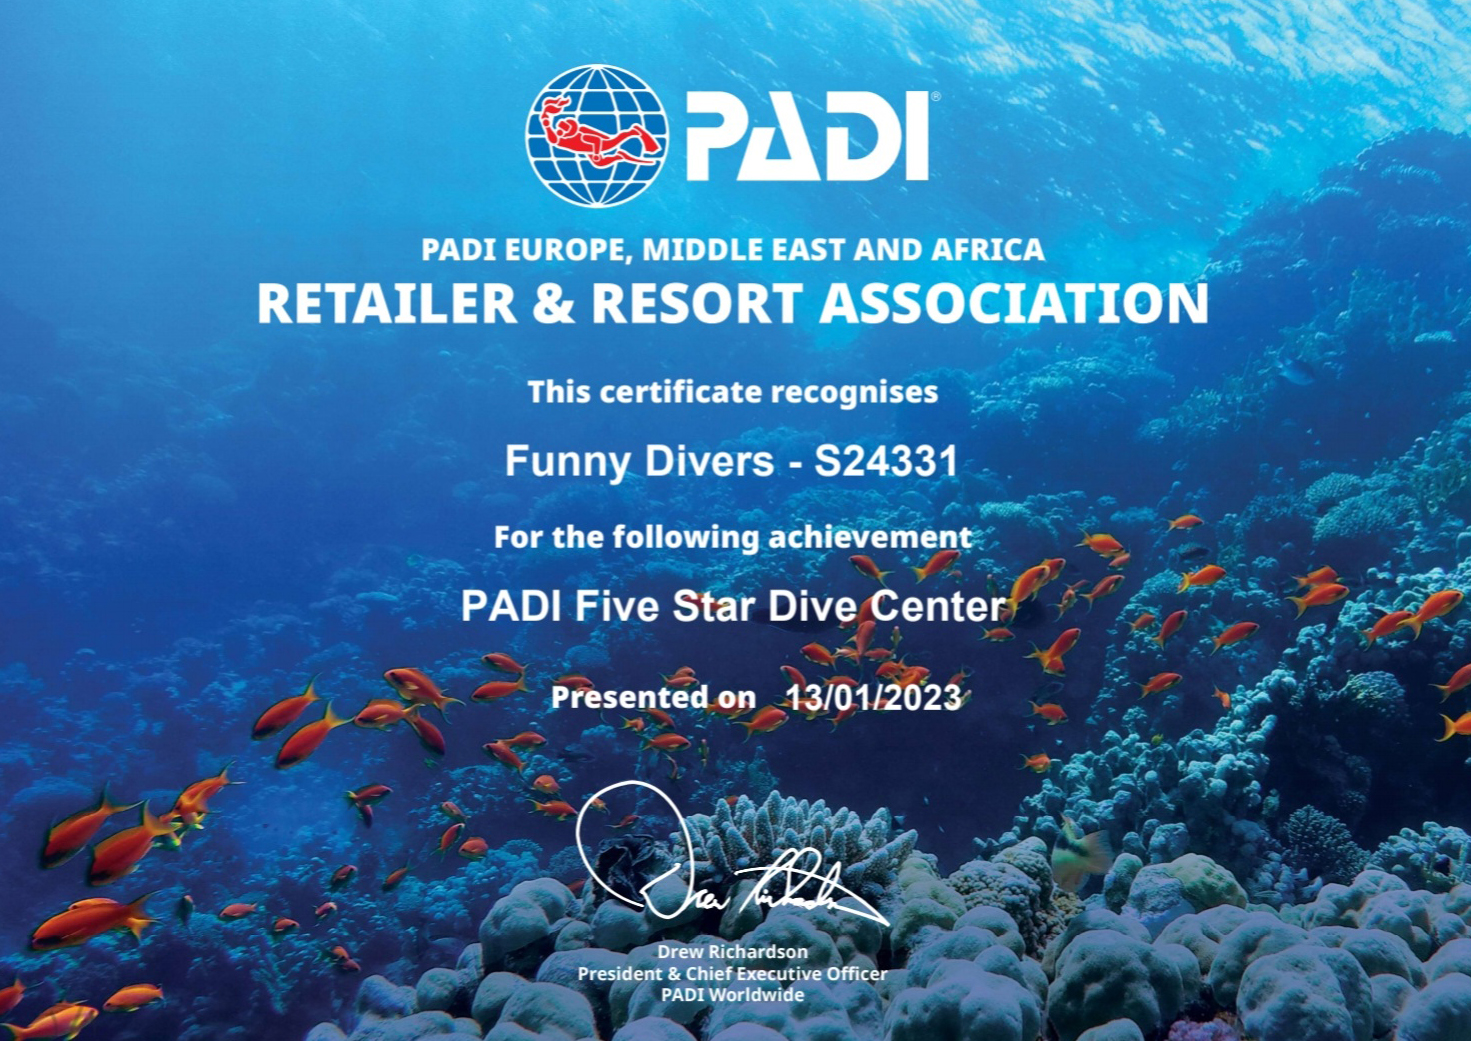 A photo of Padi 5 star award to funnydivers diving center in hurghada red sea